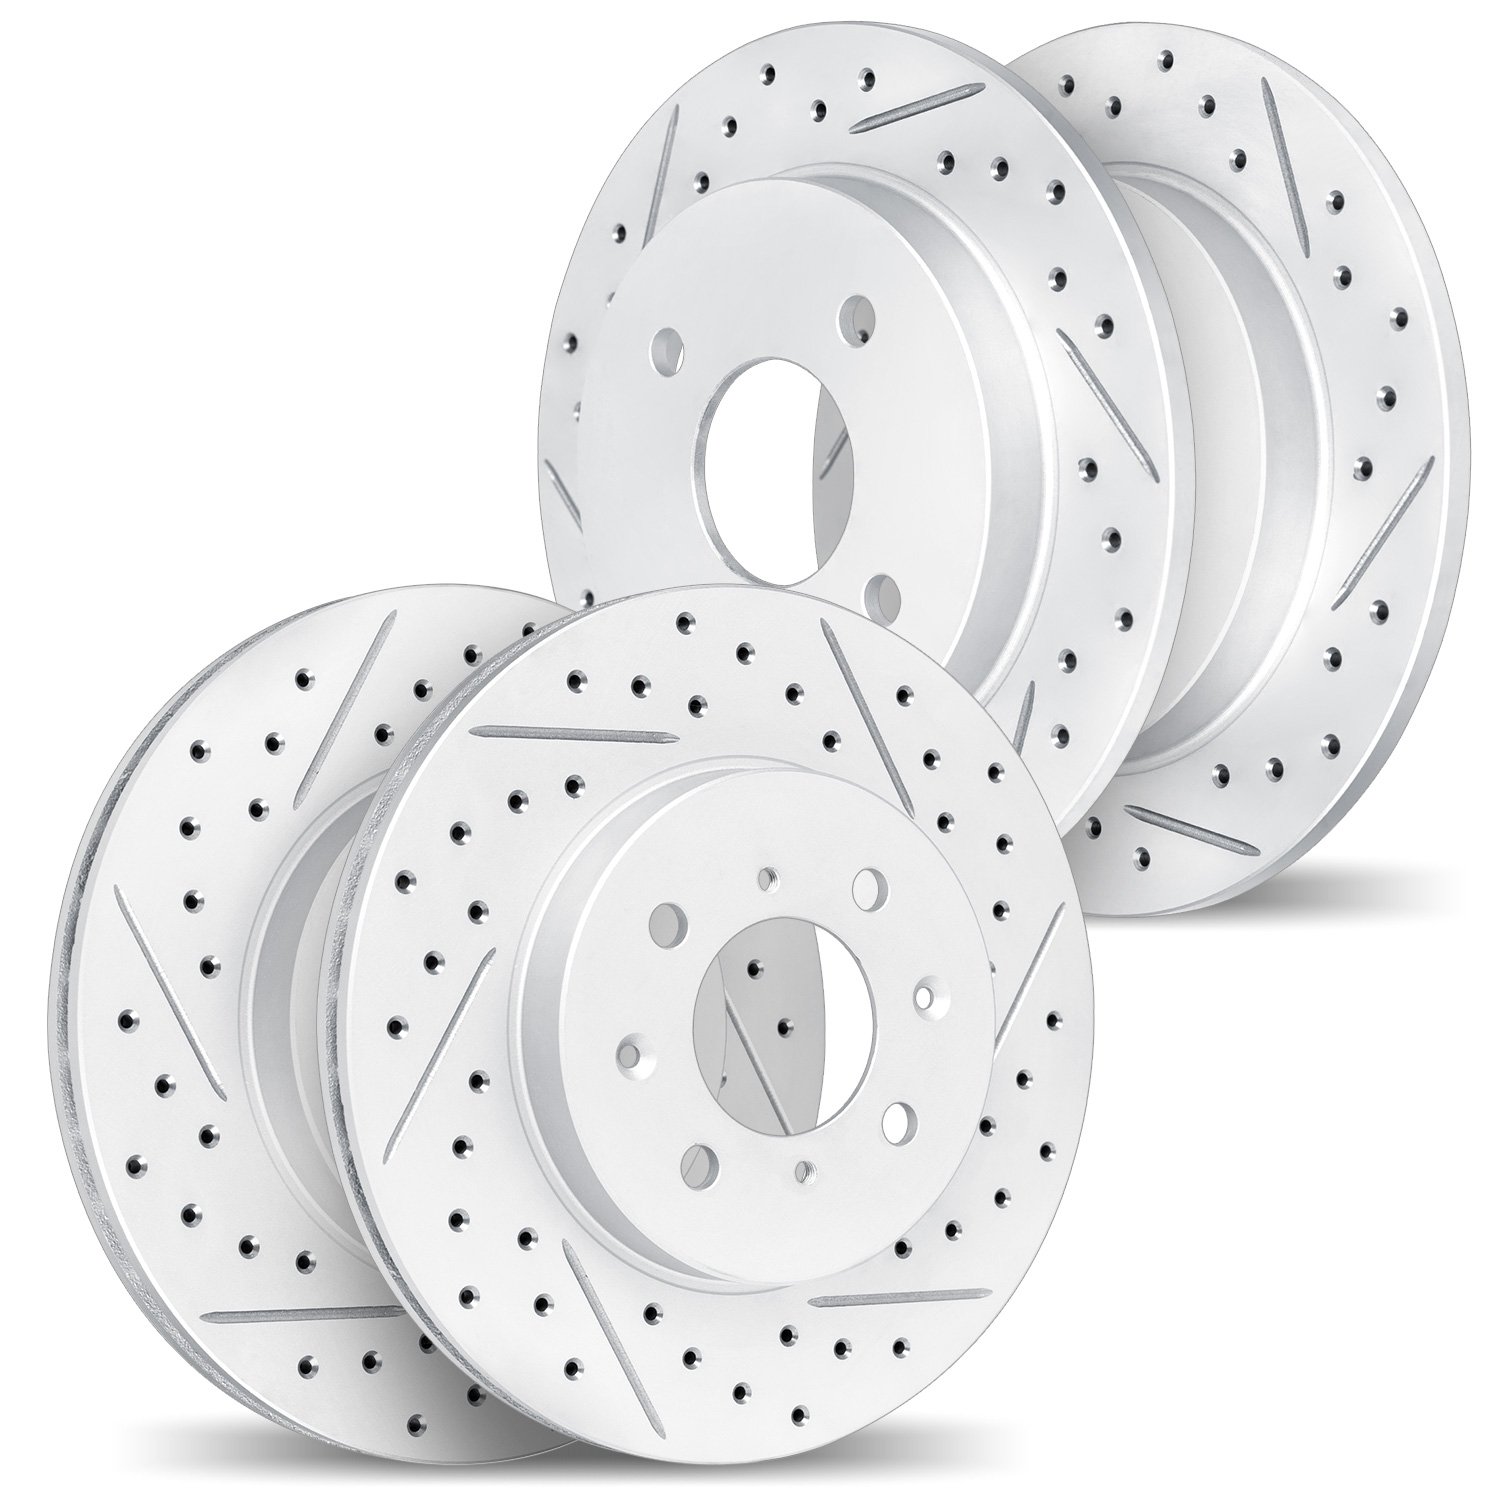 2004-01000 Geoperformance Drilled/Slotted Brake Rotors, 2004-2010 Multiple Makes/Models, Position: Front and Rear